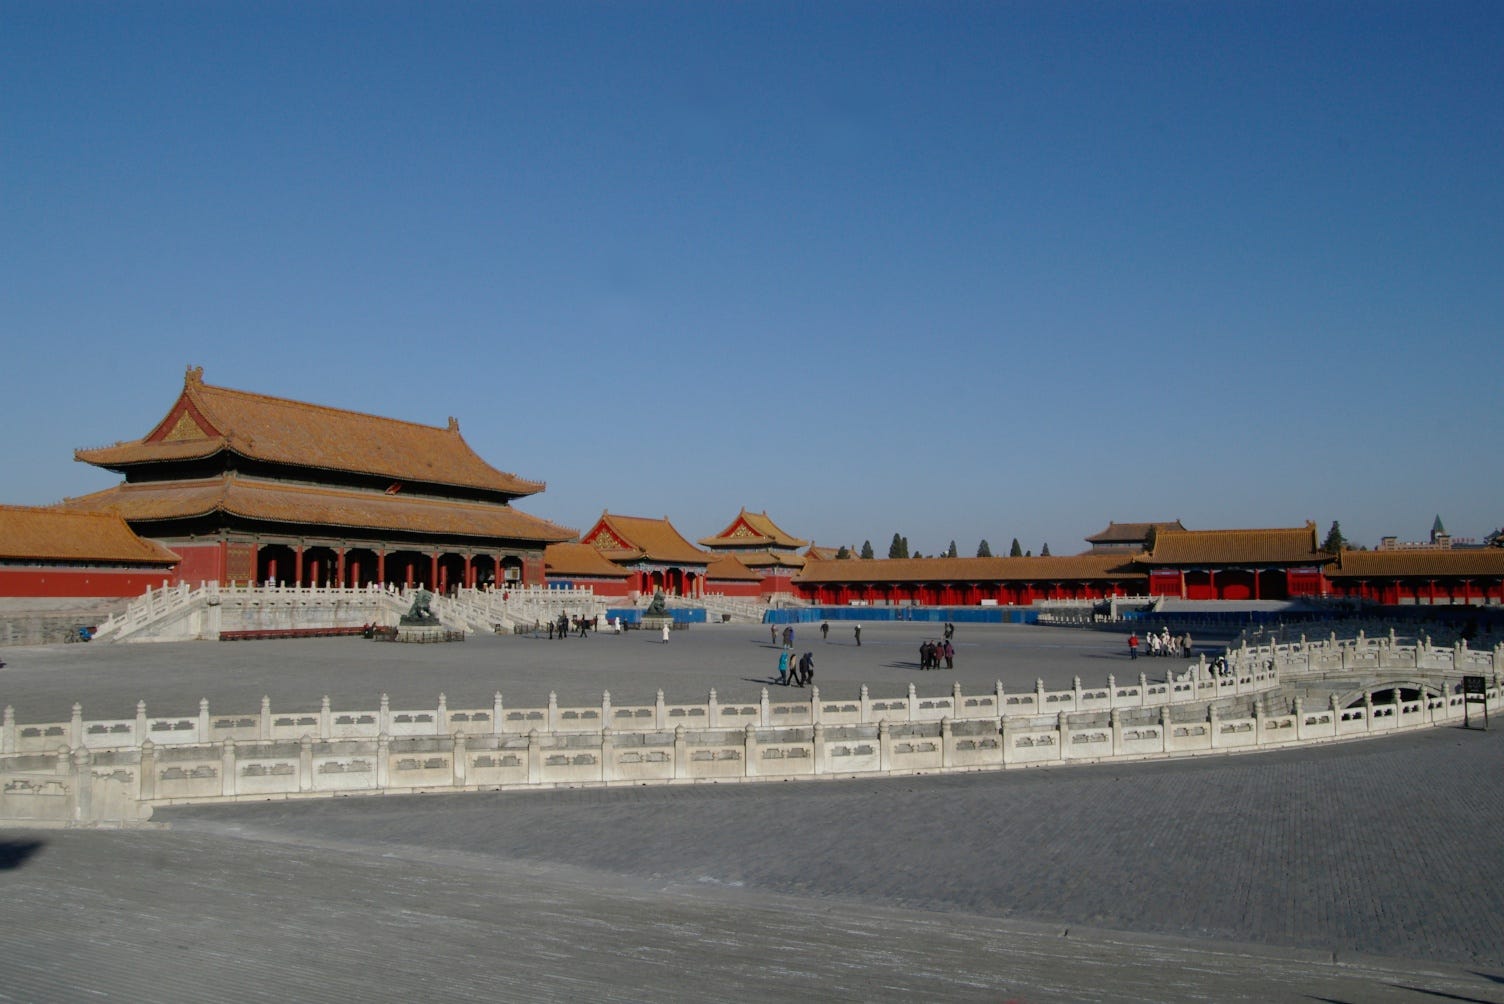 Complete Guide To Visiting The Forbidden City in Beijing